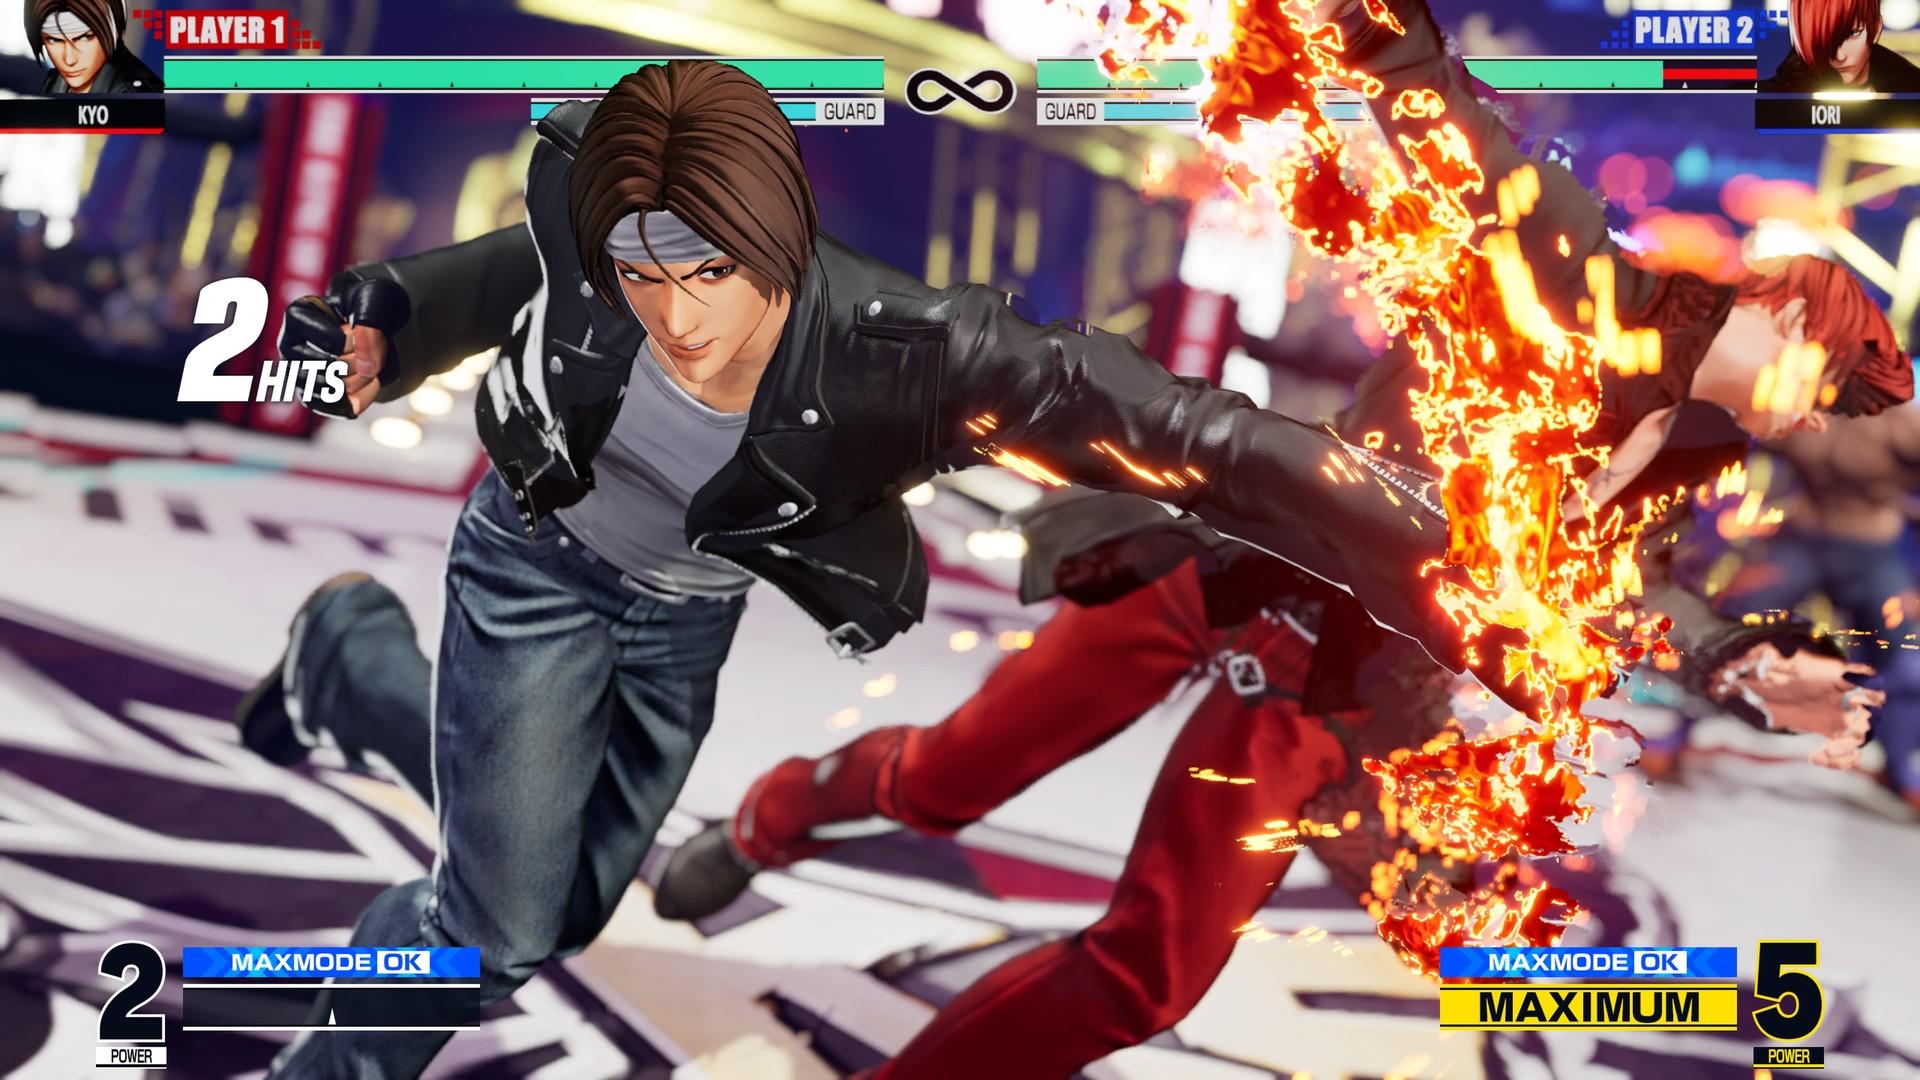 Screenshot 1 of THE KING OF FIGHTERS XV 